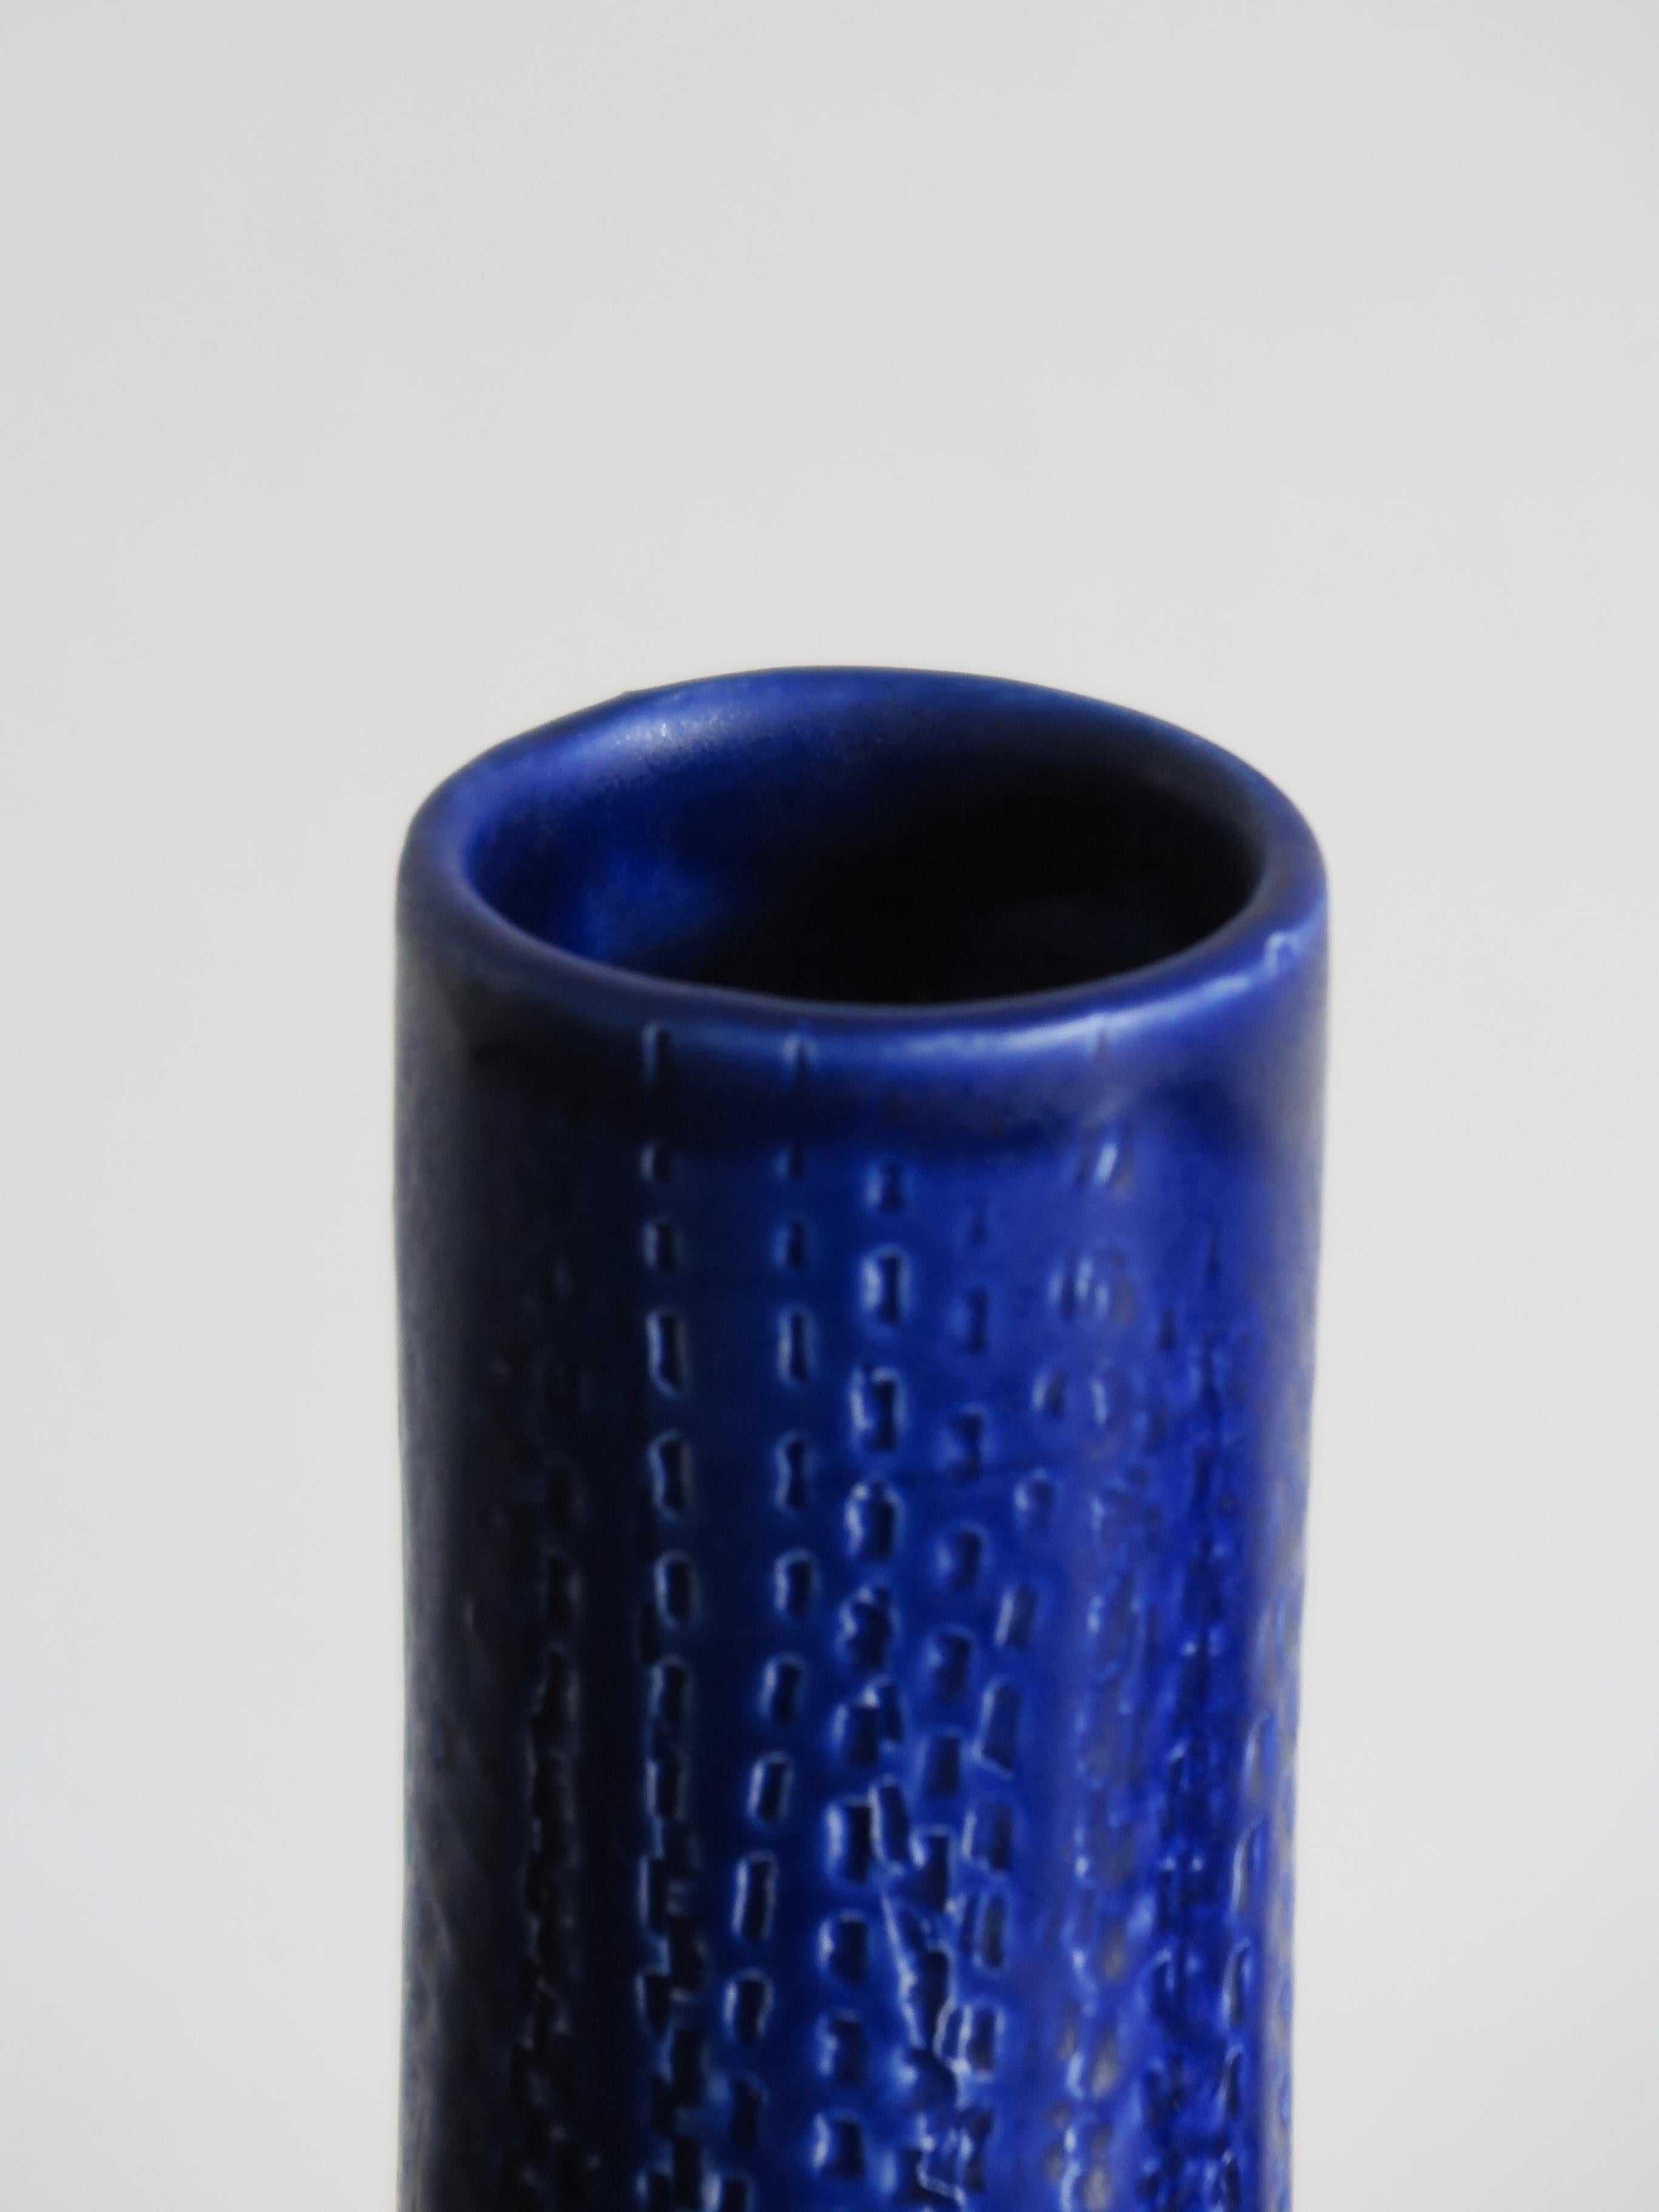 Contemporary Blue Green Ceramic Vases Designed by Capperidicasa, Made in Italy 1